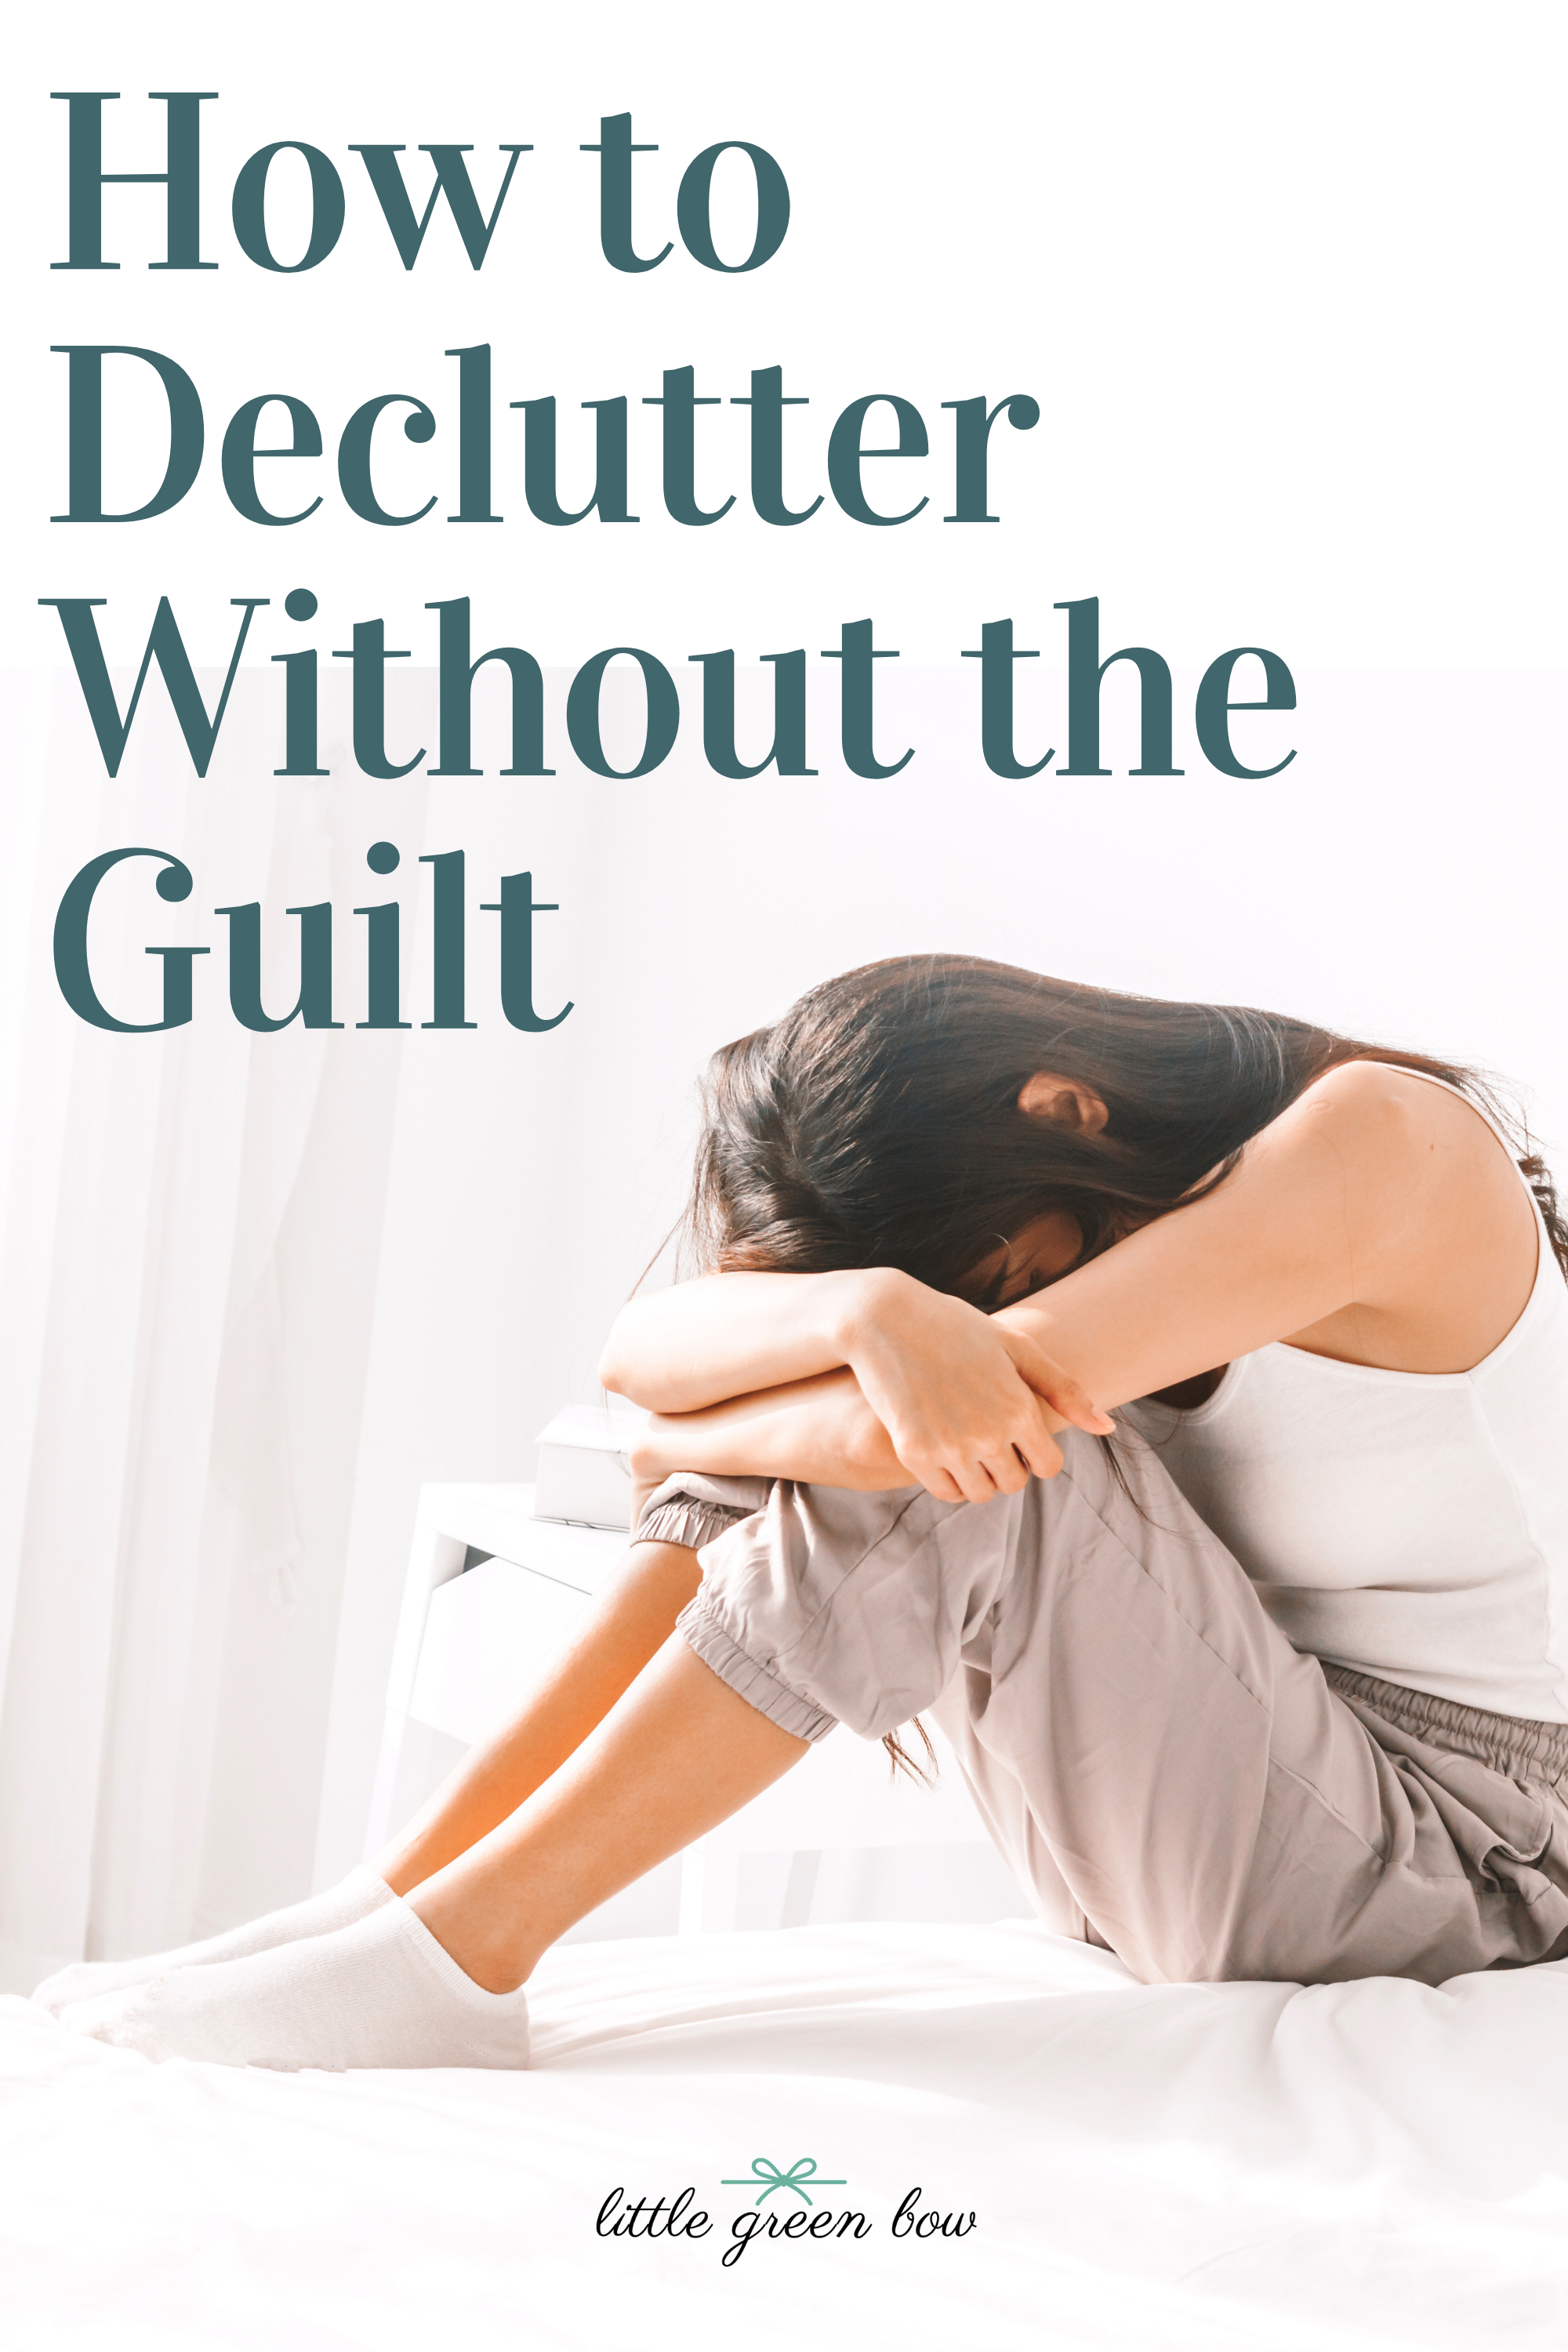 How to Declutter without the Guilt